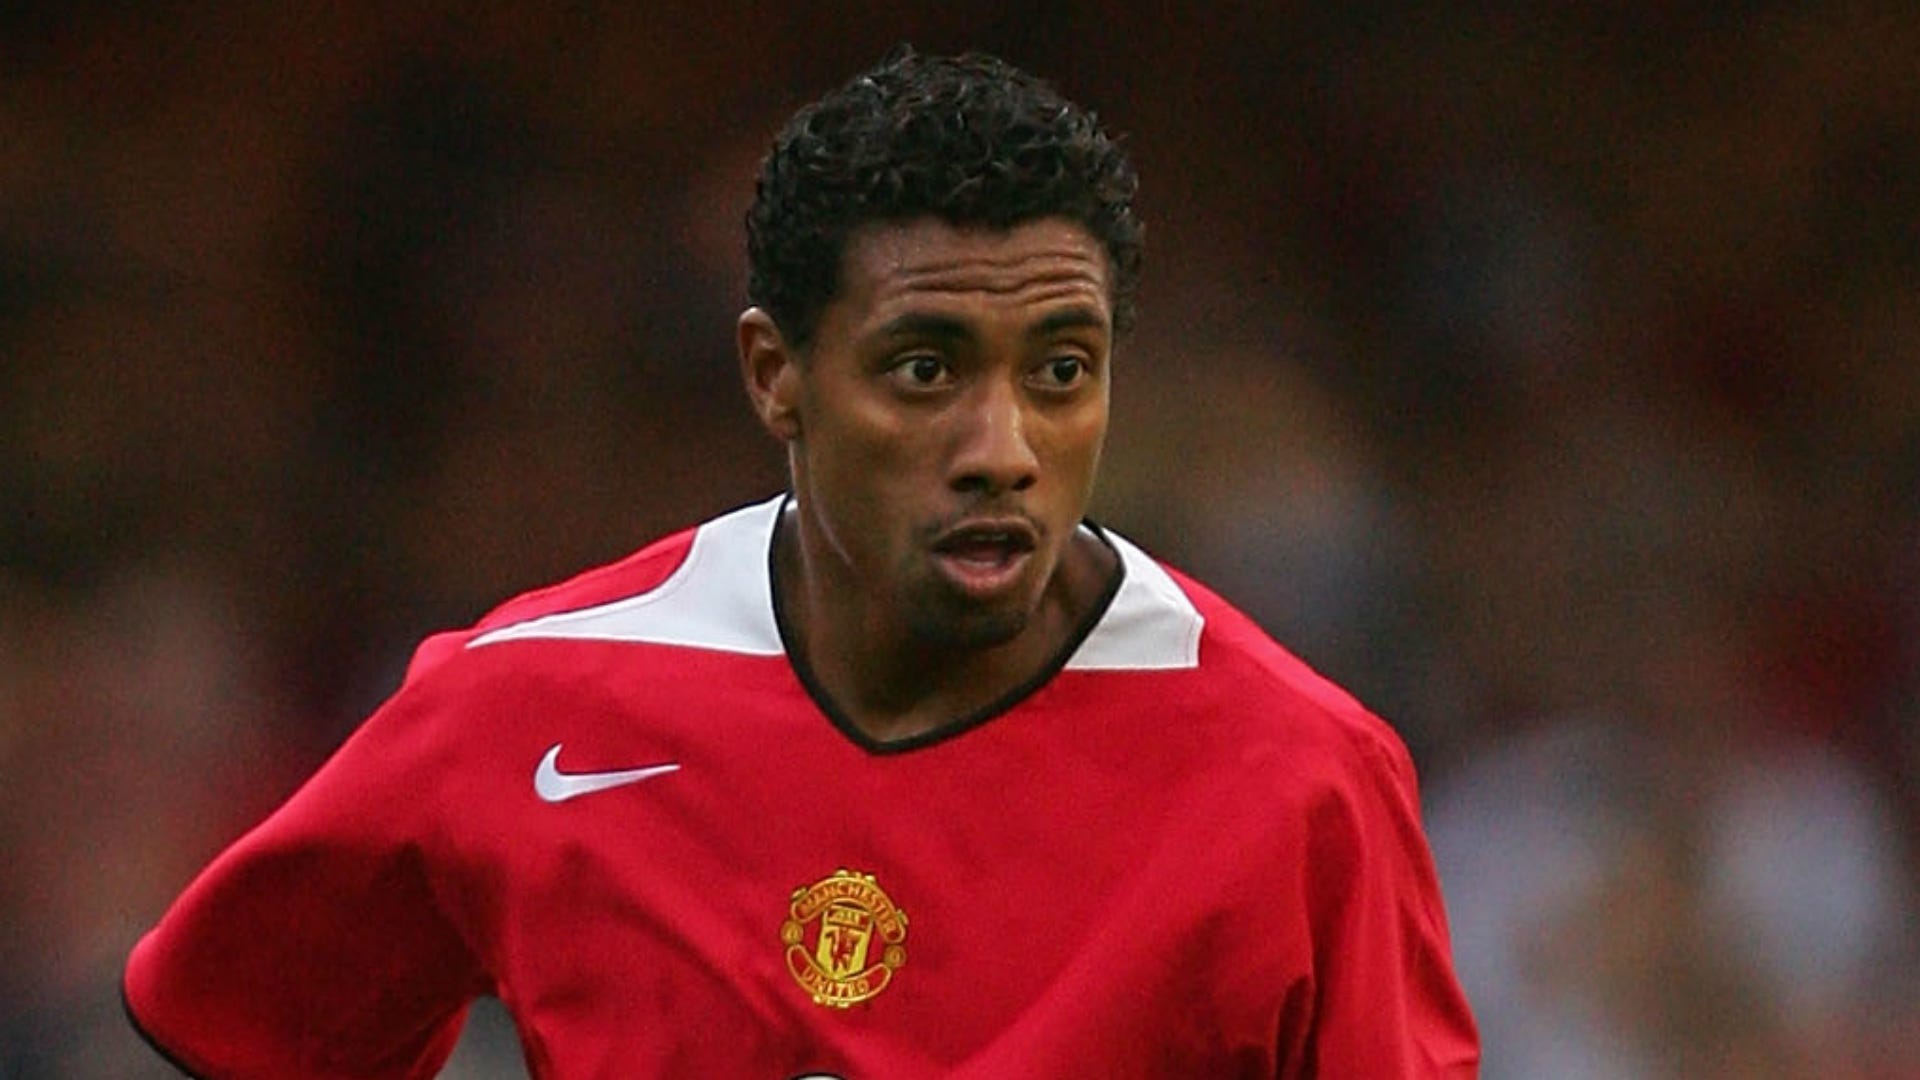 Man Utd considered Kleberson a safer bet than Ronaldo - so why did the World Cup winner flop at Old Trafford? | Goal.com Singapore